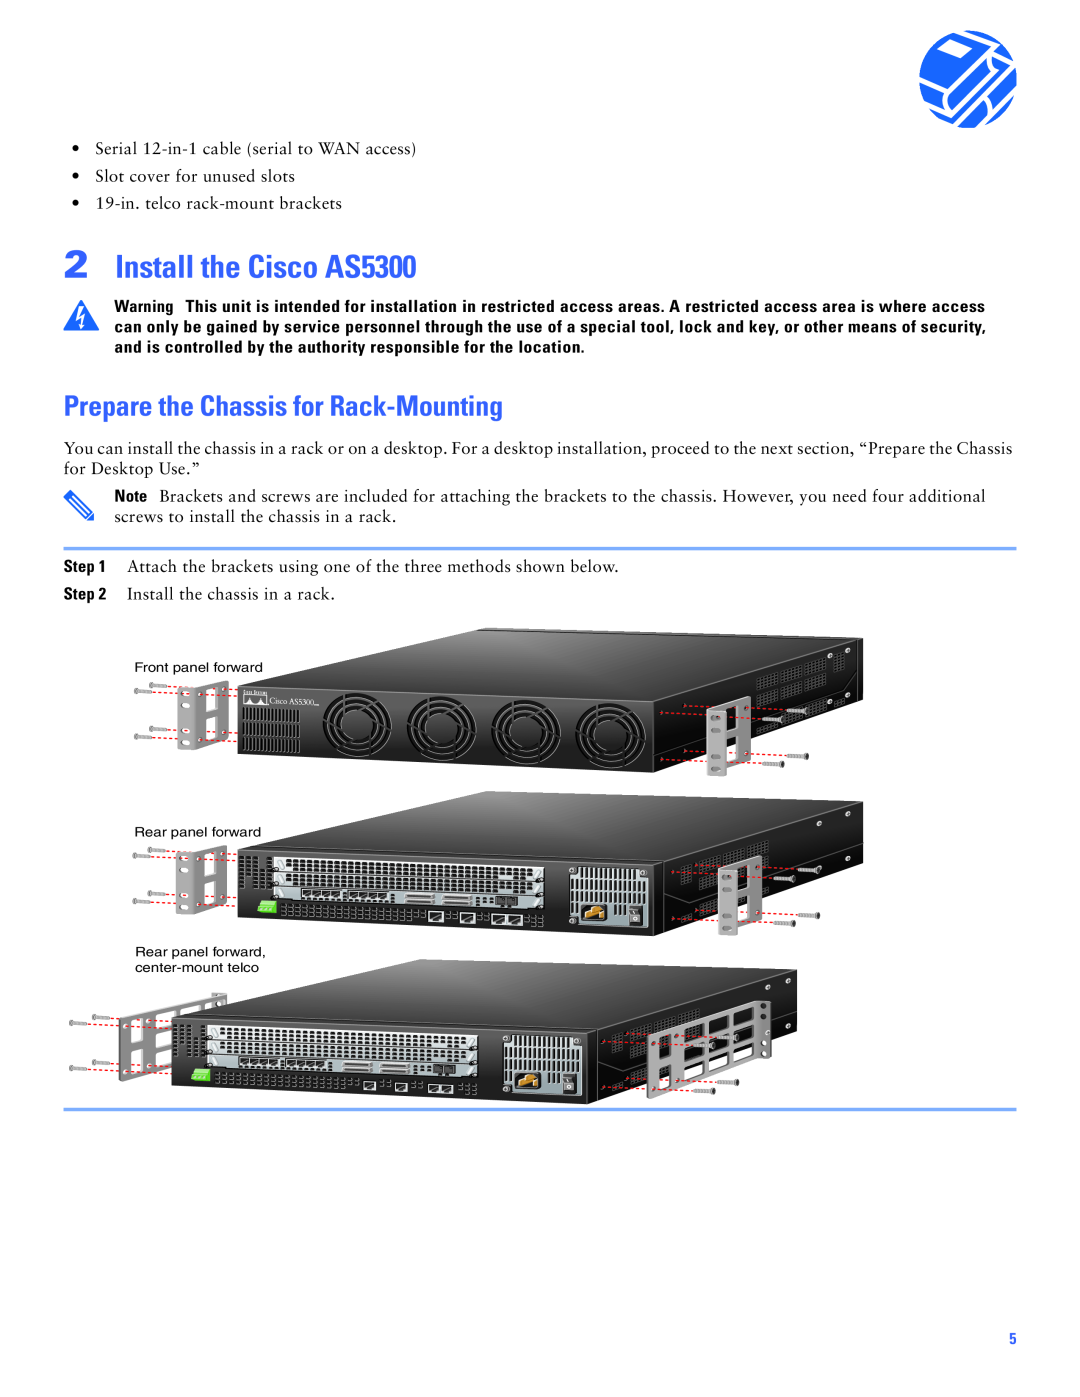 Cisco Systems manual Install the Cisco AS5300, Prepare the Chassis for Rack-Mounting 